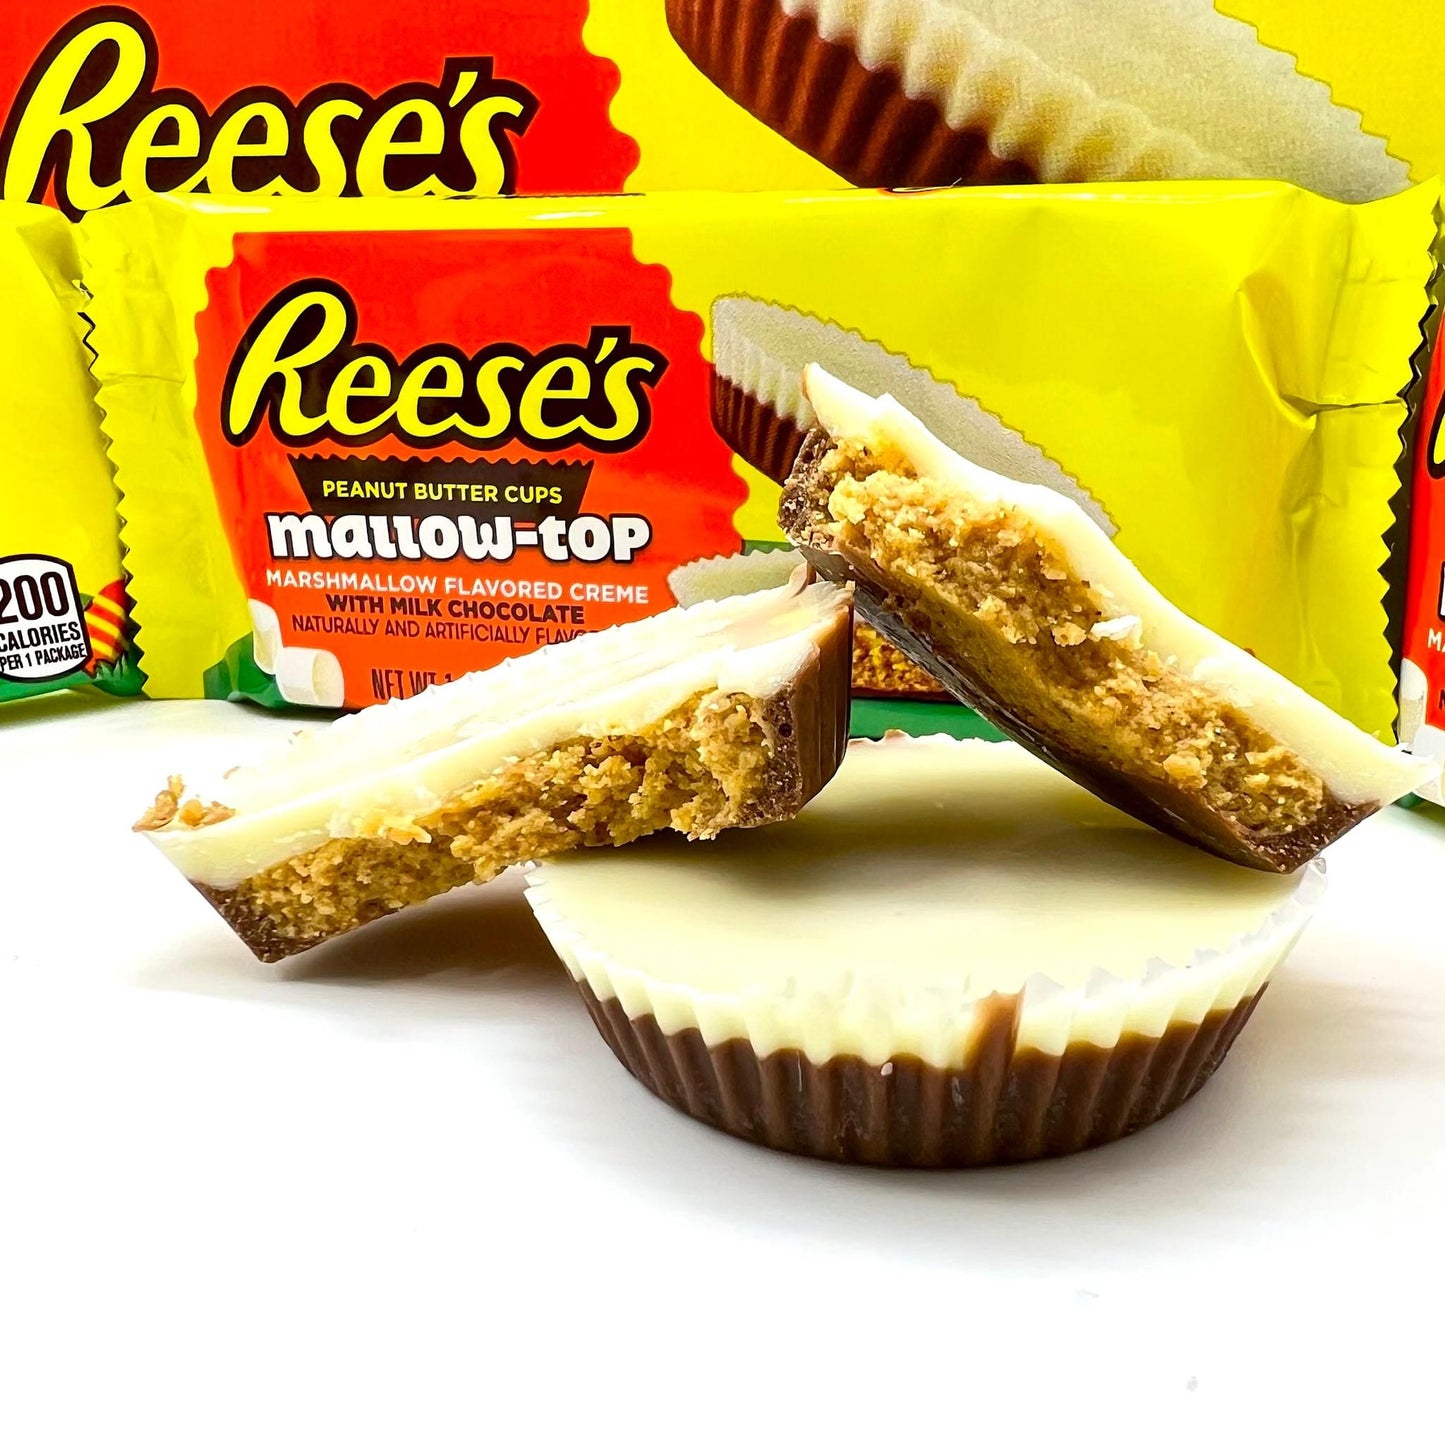 Reese's Mallow-Top Peanut Butter Cup